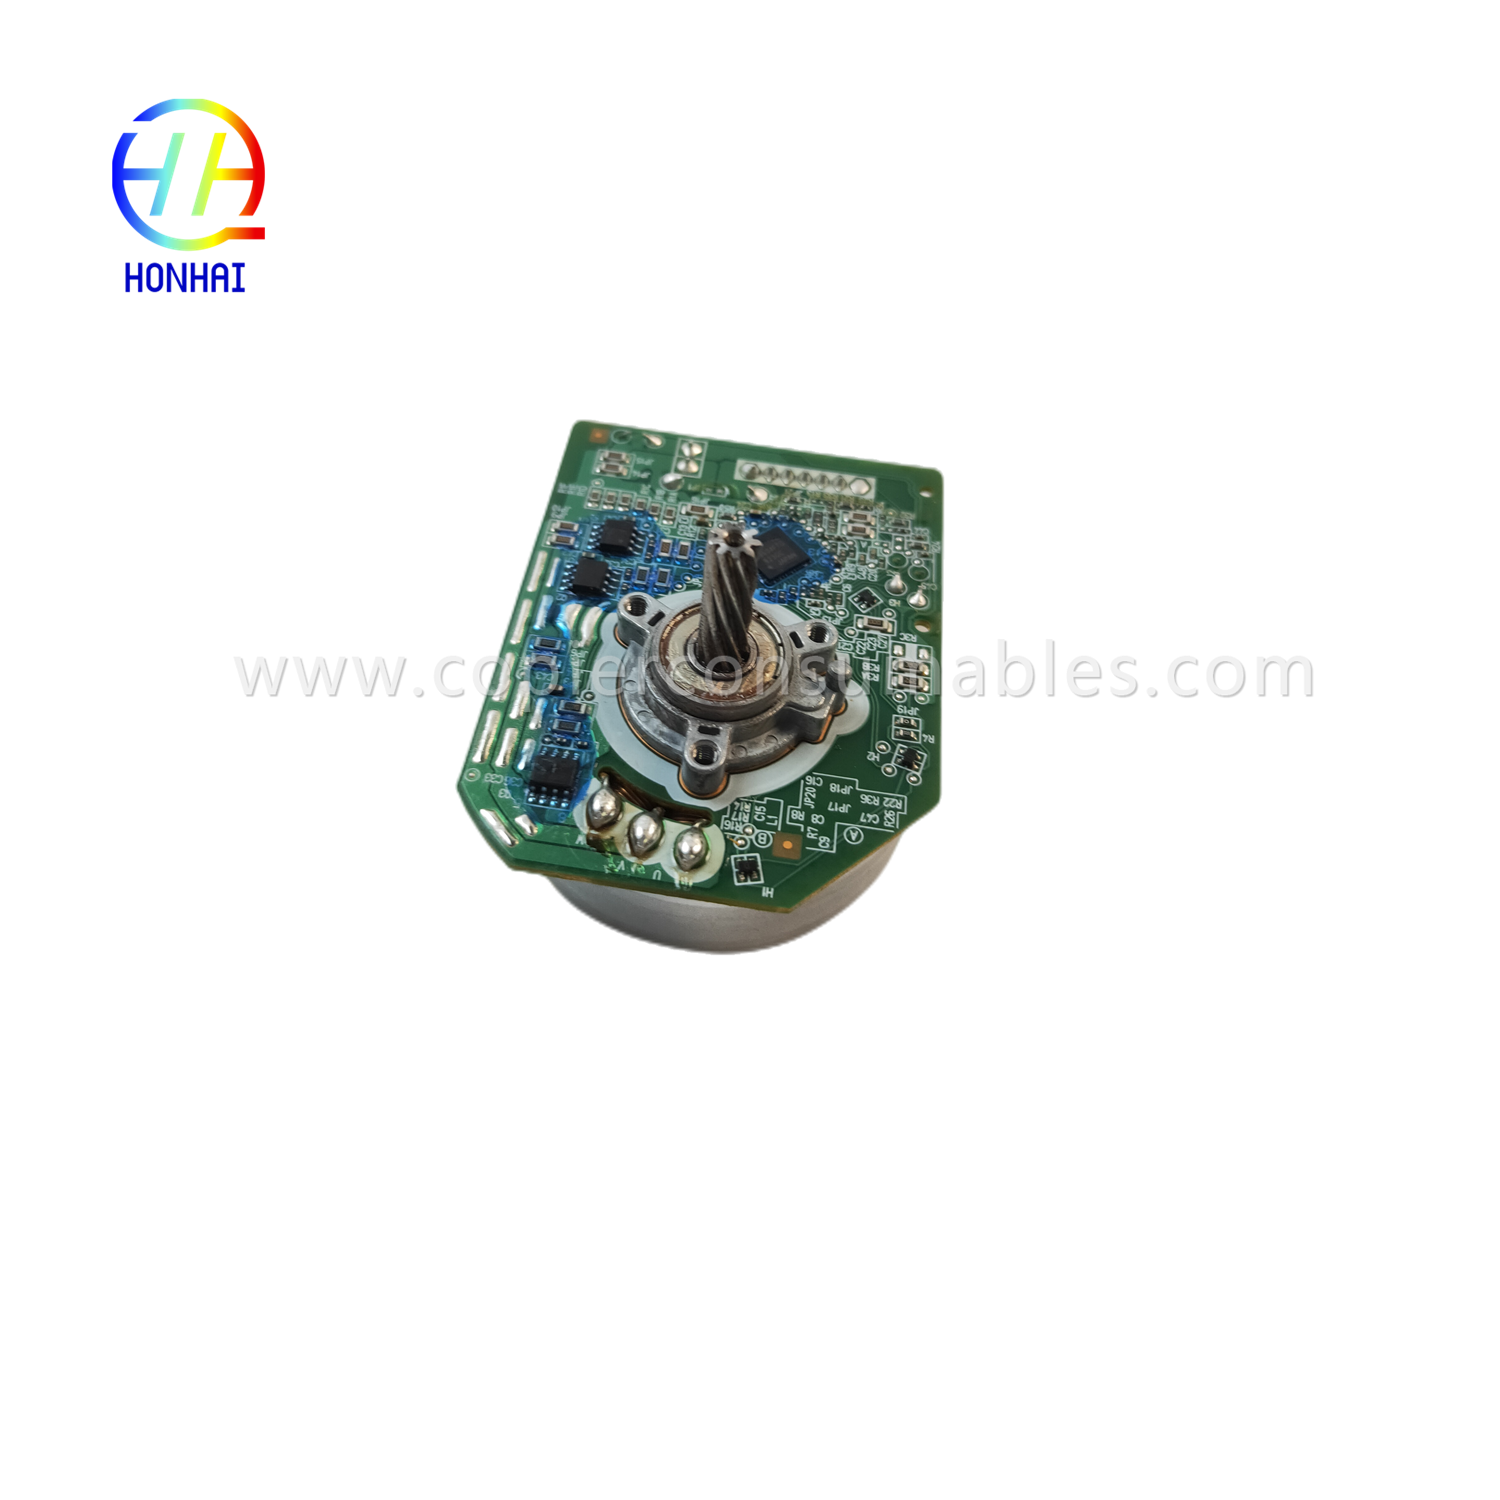 https://www.copierconsumables.com/motor-for-kyocera-ecosys-seri-parts-nr-302lc44014-48m069f052-b-product/